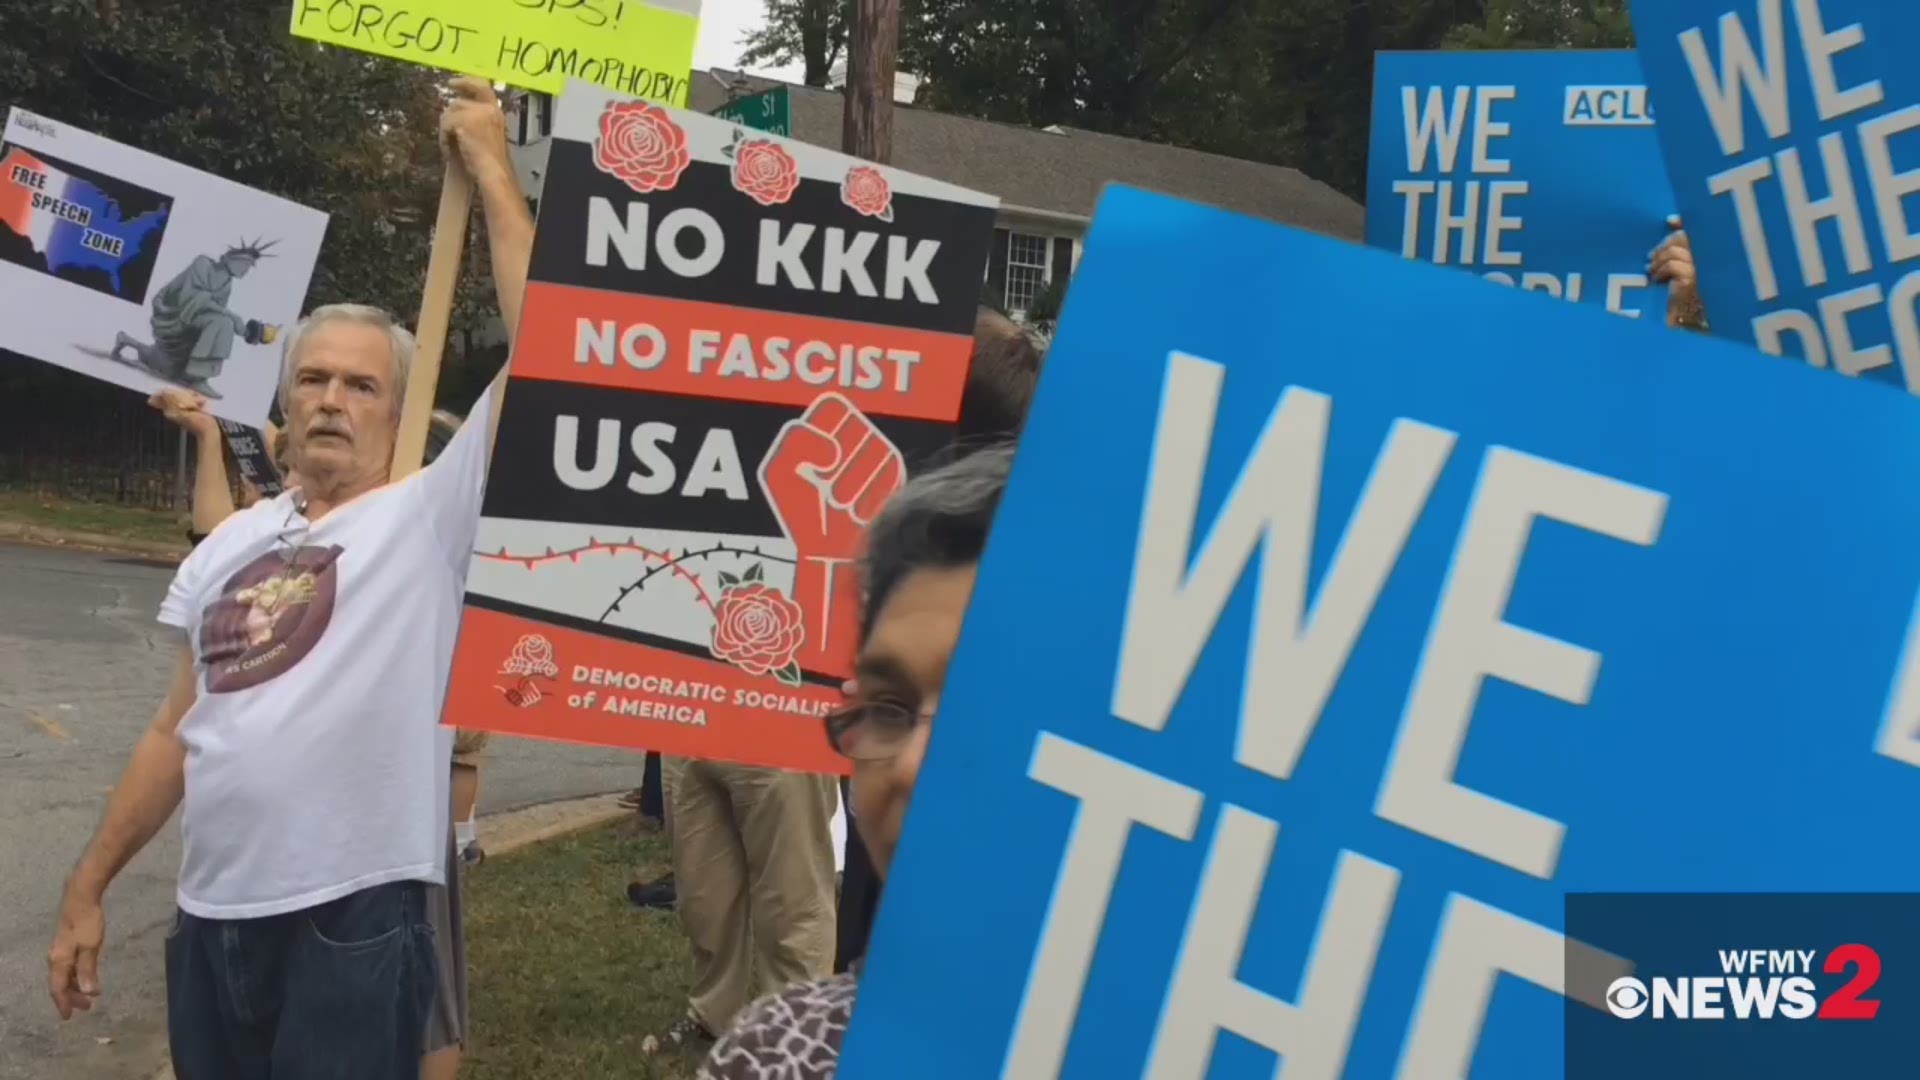 Anti-Trump Demonstrators Protest Trump's Arrival in Greensboro ahead of his visit. Trump is coming to the Triad for a fundraiser.